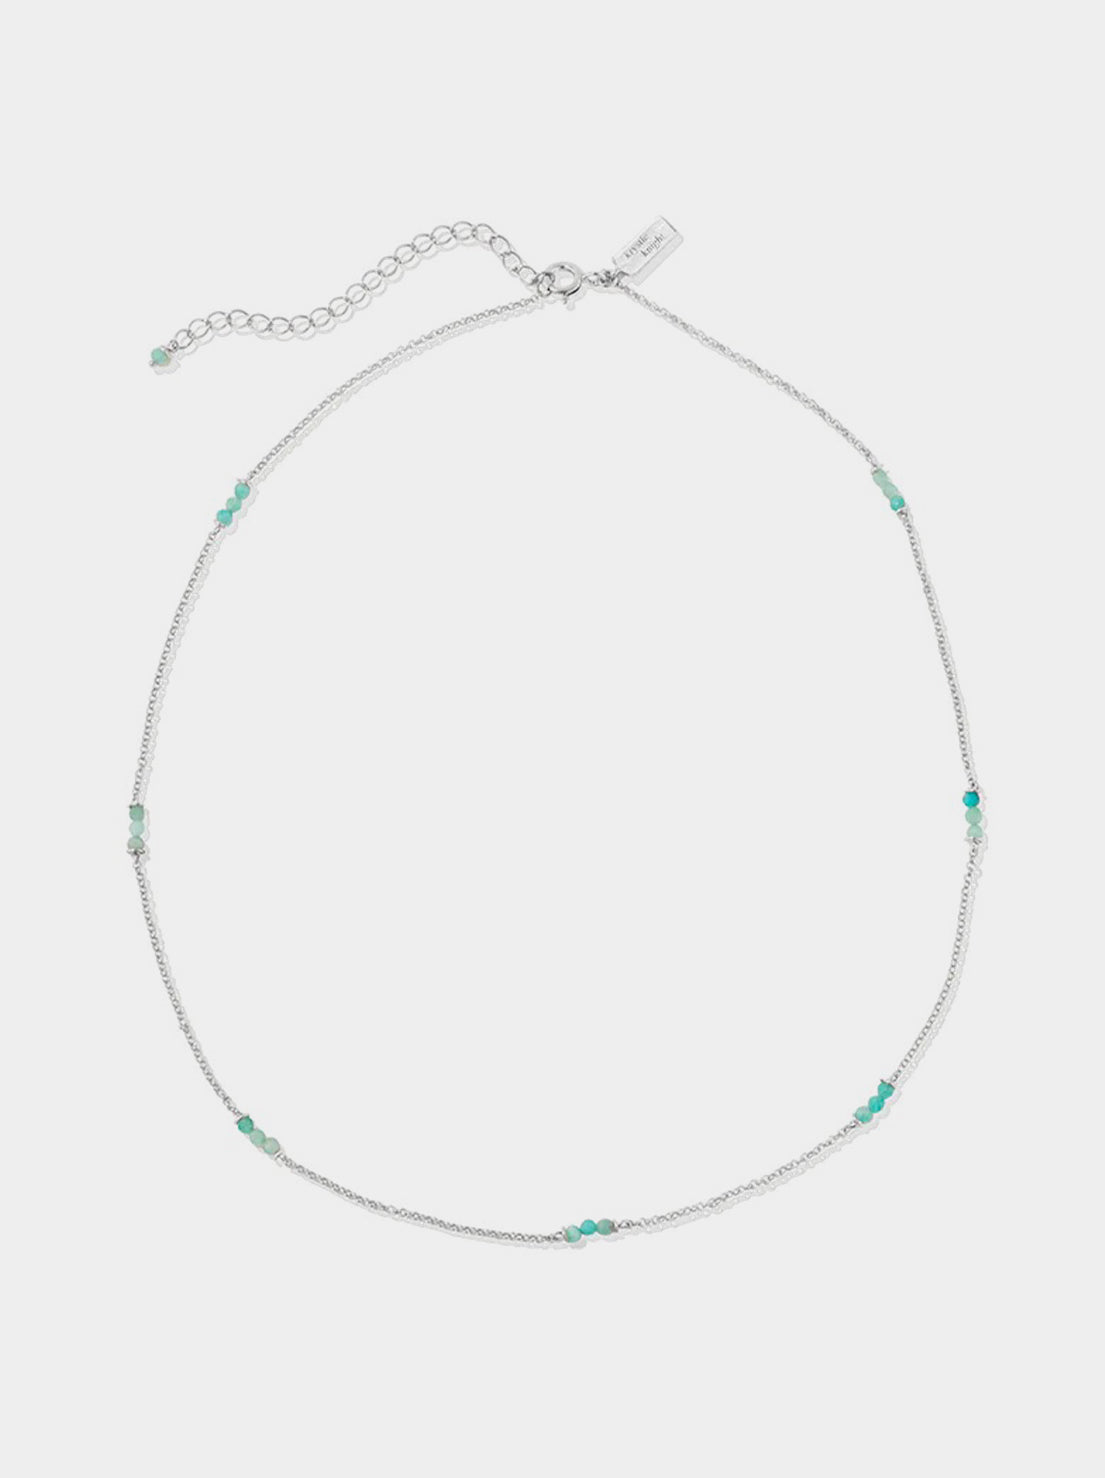 Krystle Knight - Infinite Courage Necklace - Amazonite - Sterling Silver